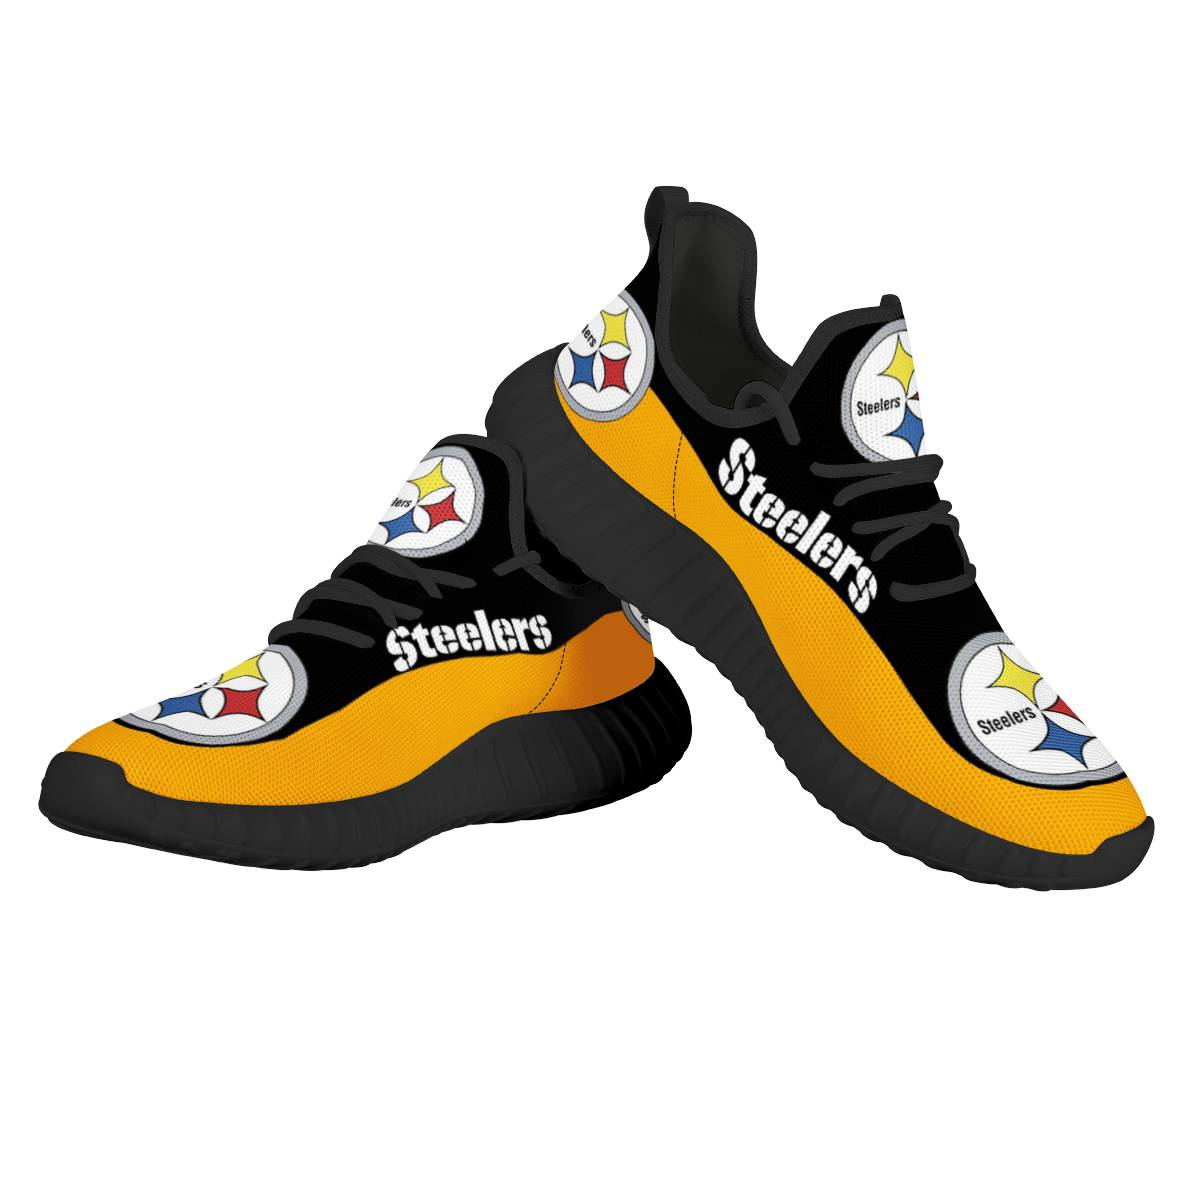 Men's NFL Pittsburgh Steelers Mesh Knit Sneakers/Shoes 007